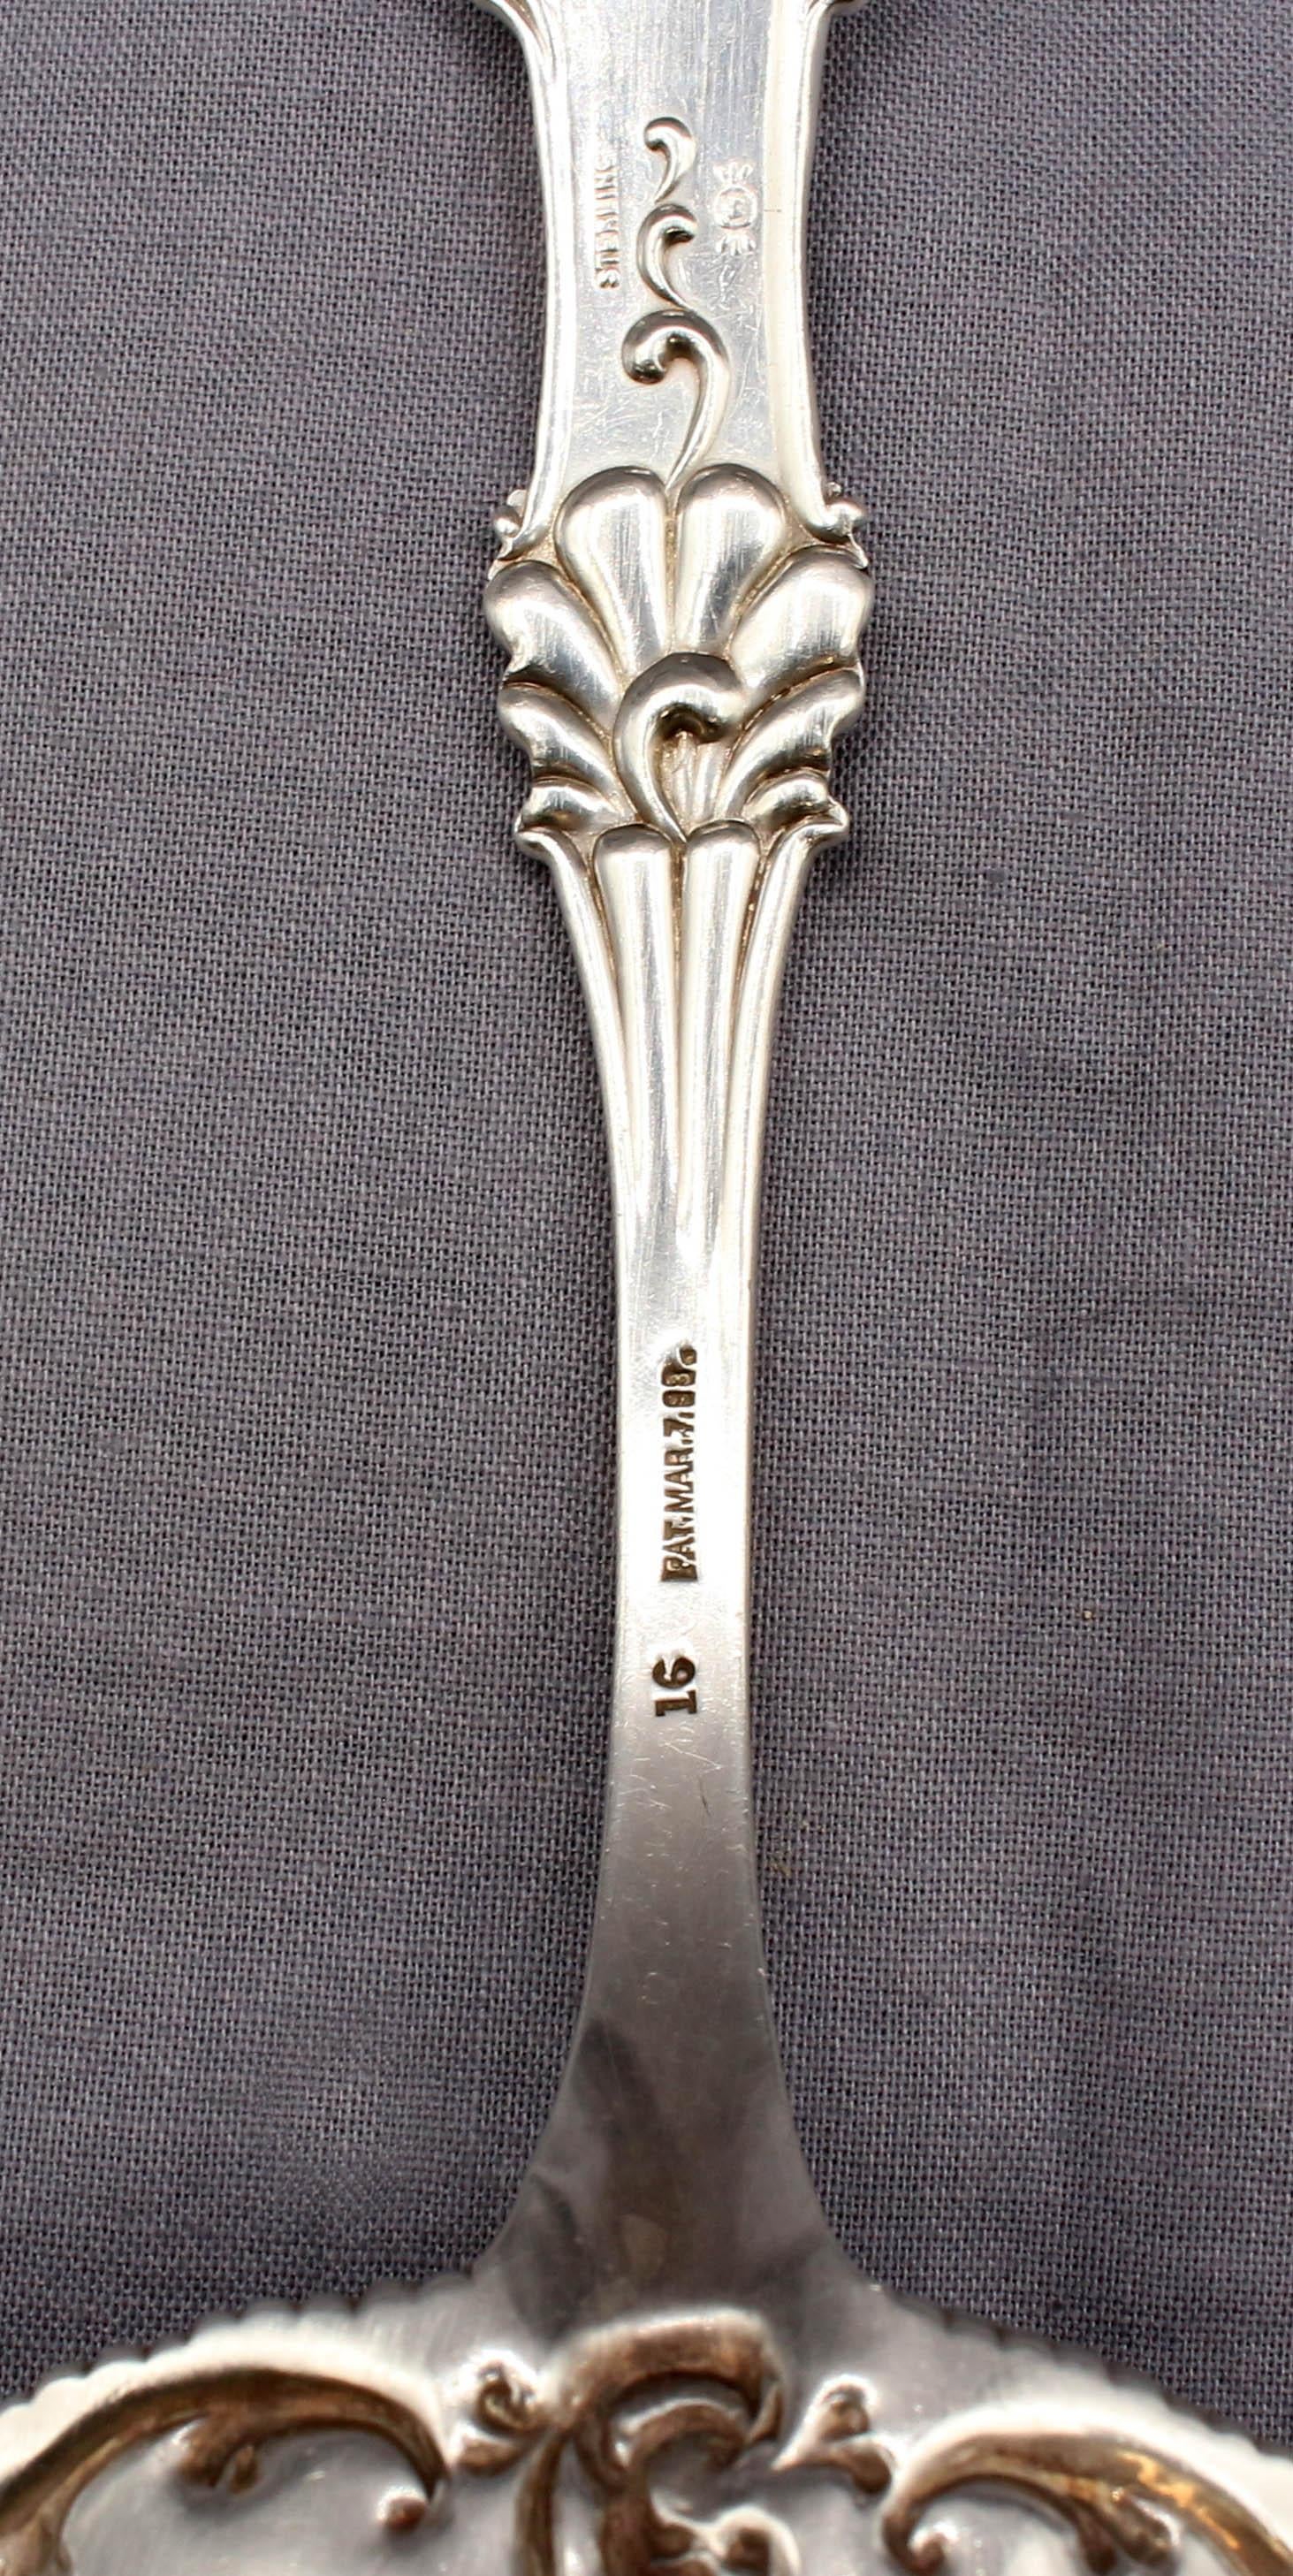 19th Century 1893 Sterling Silver Berry Spoon by Frank Whiting